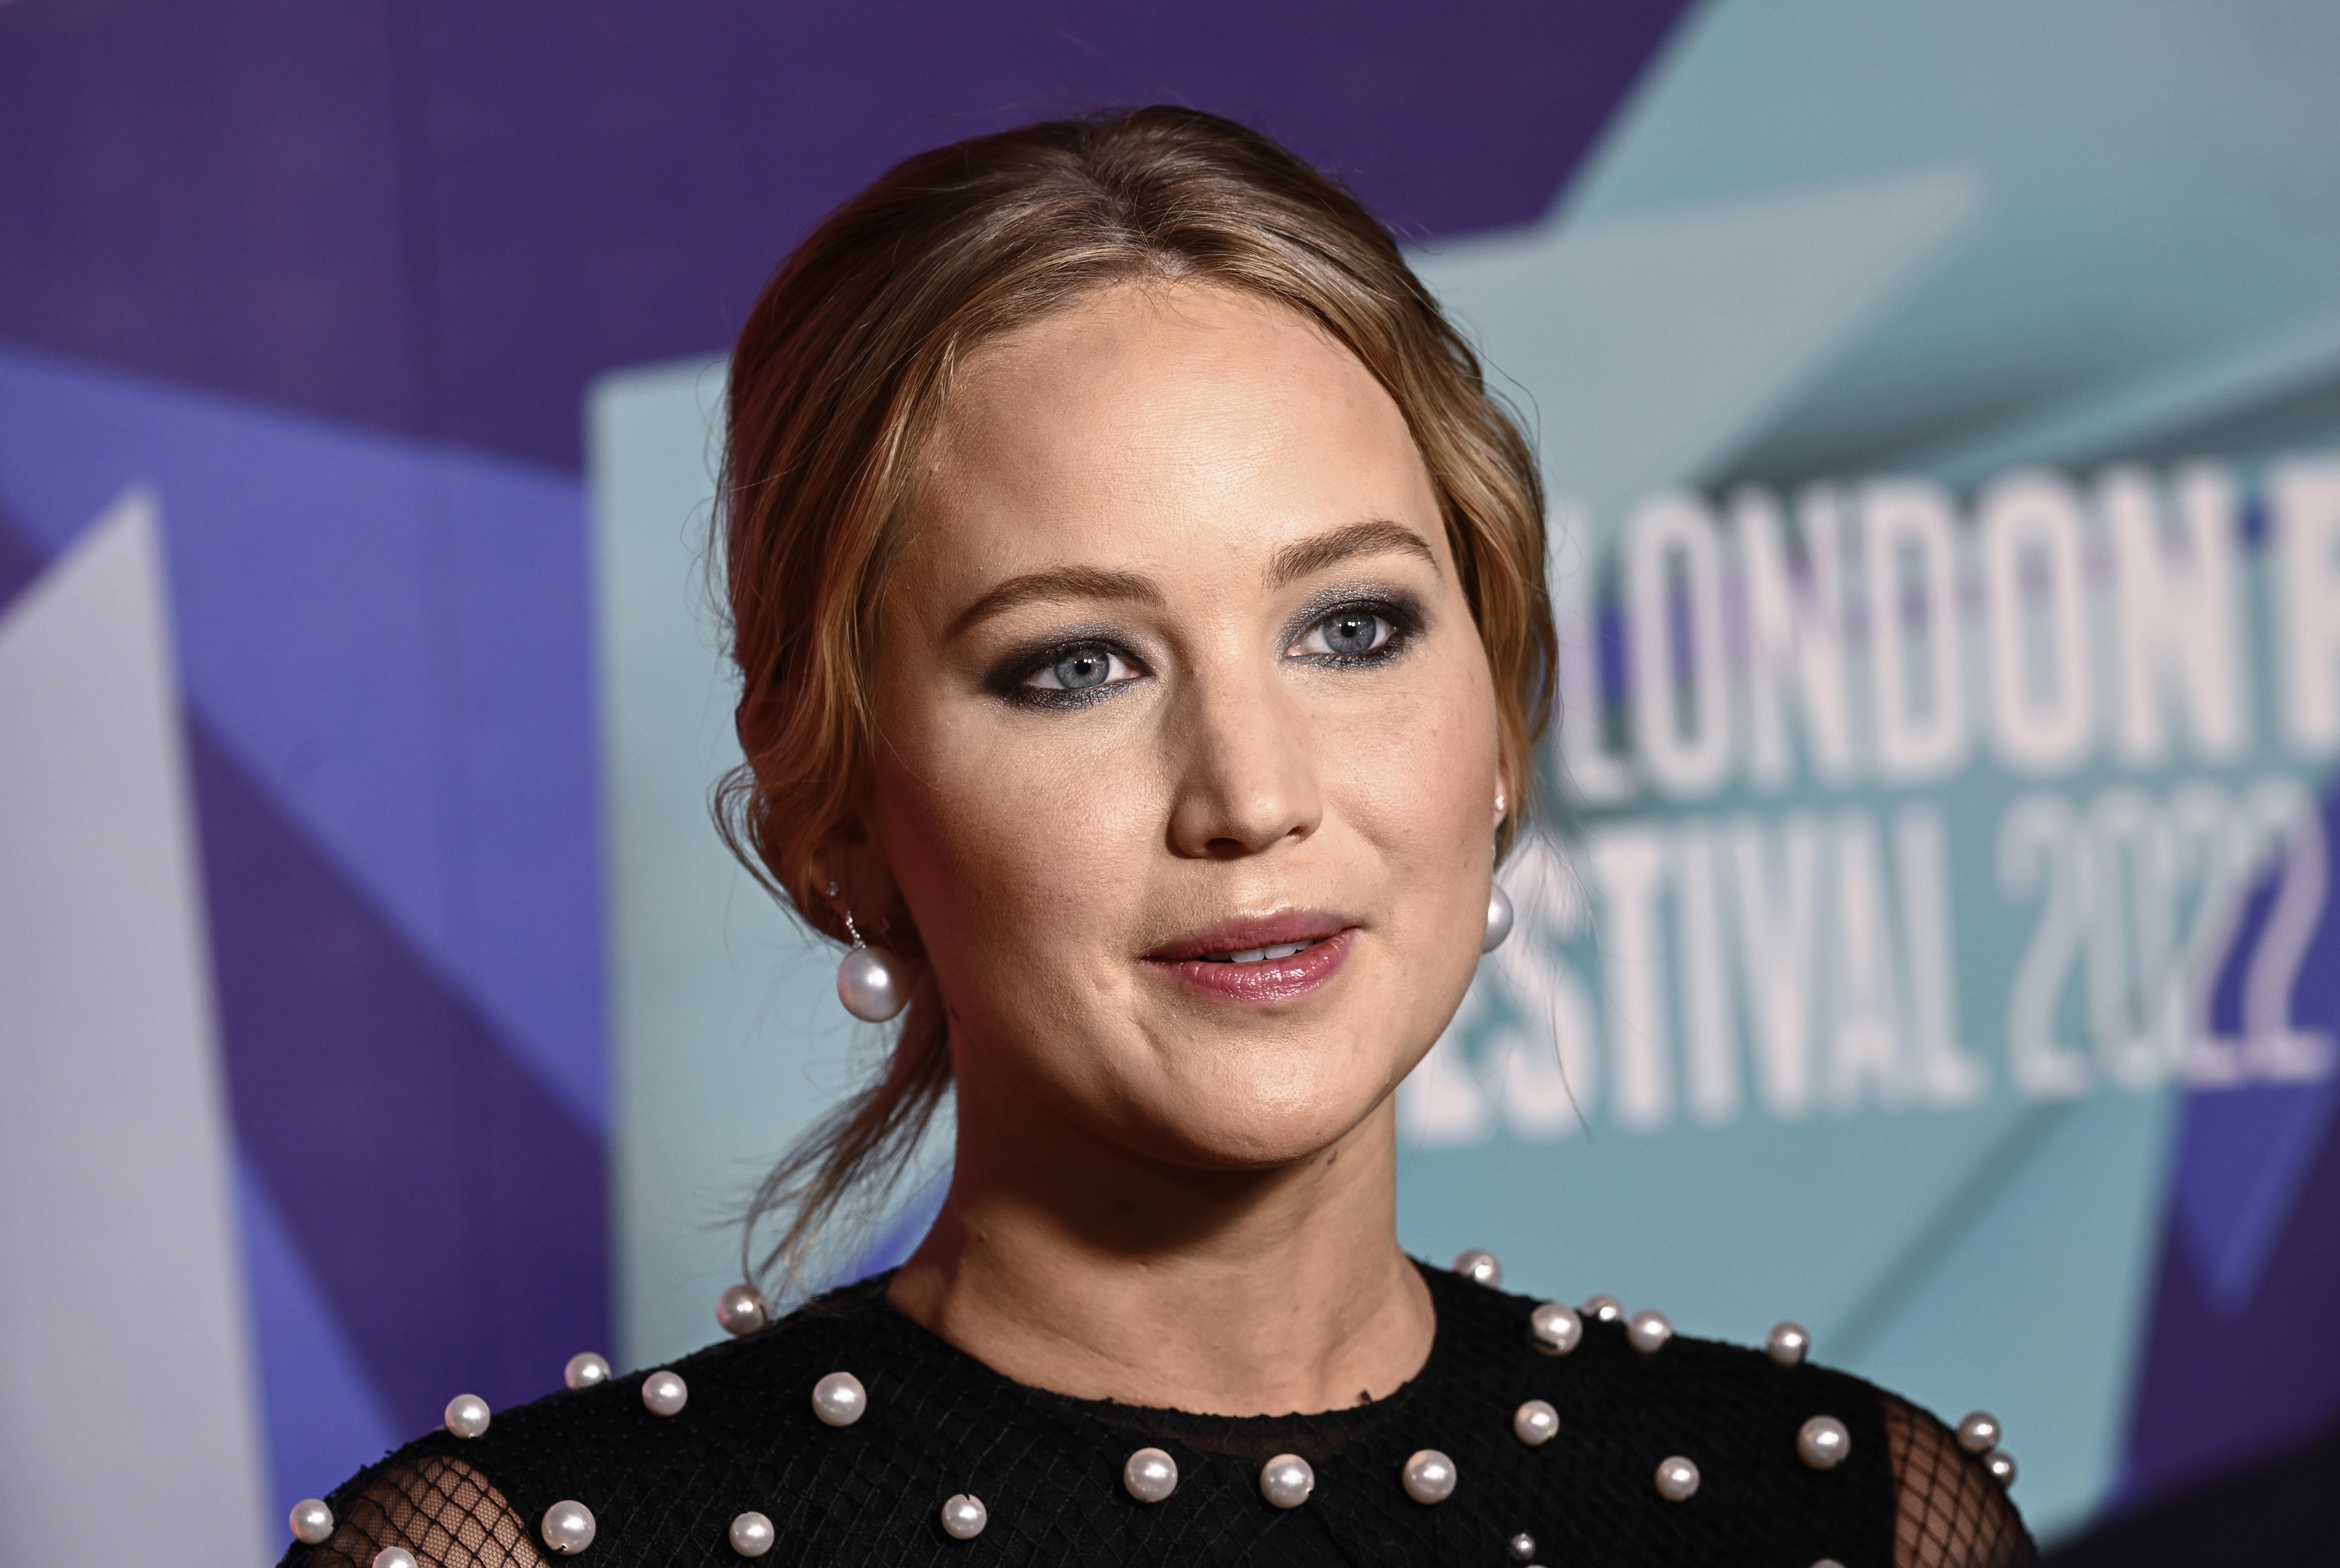 Jennifer Lawrence attends the "Causeway" European premiere during the 66th BFI London Film Festival, at the BFI Southbank, on October 8, 2022, in London, England. | Source: Getty Images